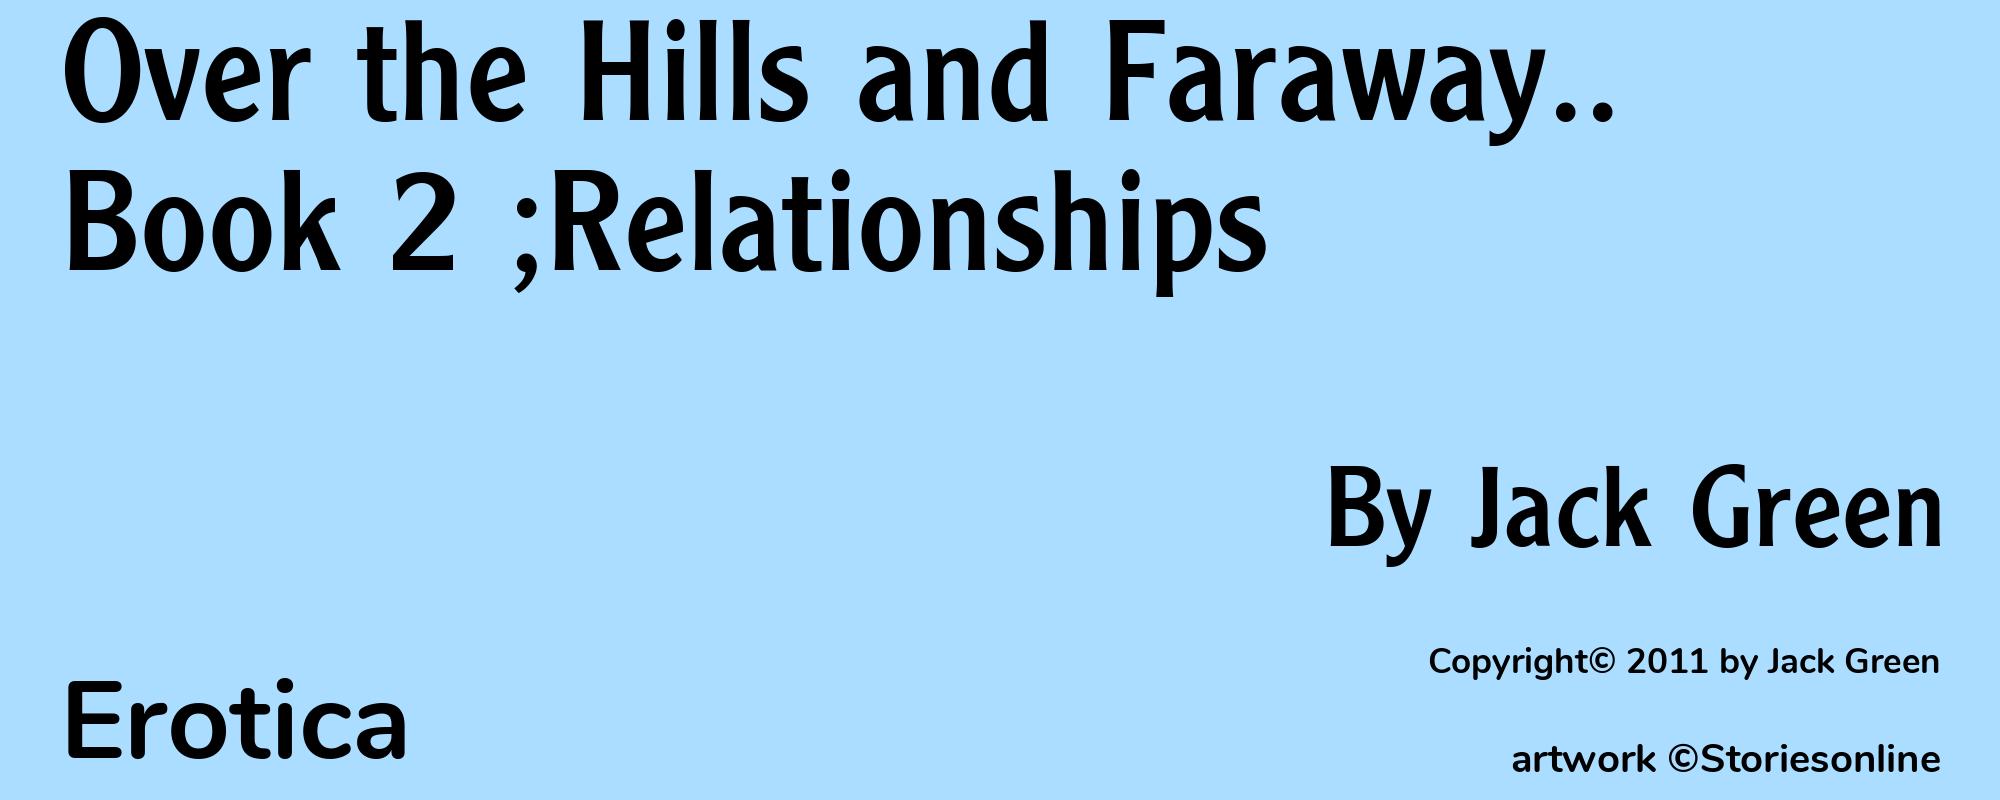 Over the Hills and Faraway.. Book 2 ;Relationships - Cover